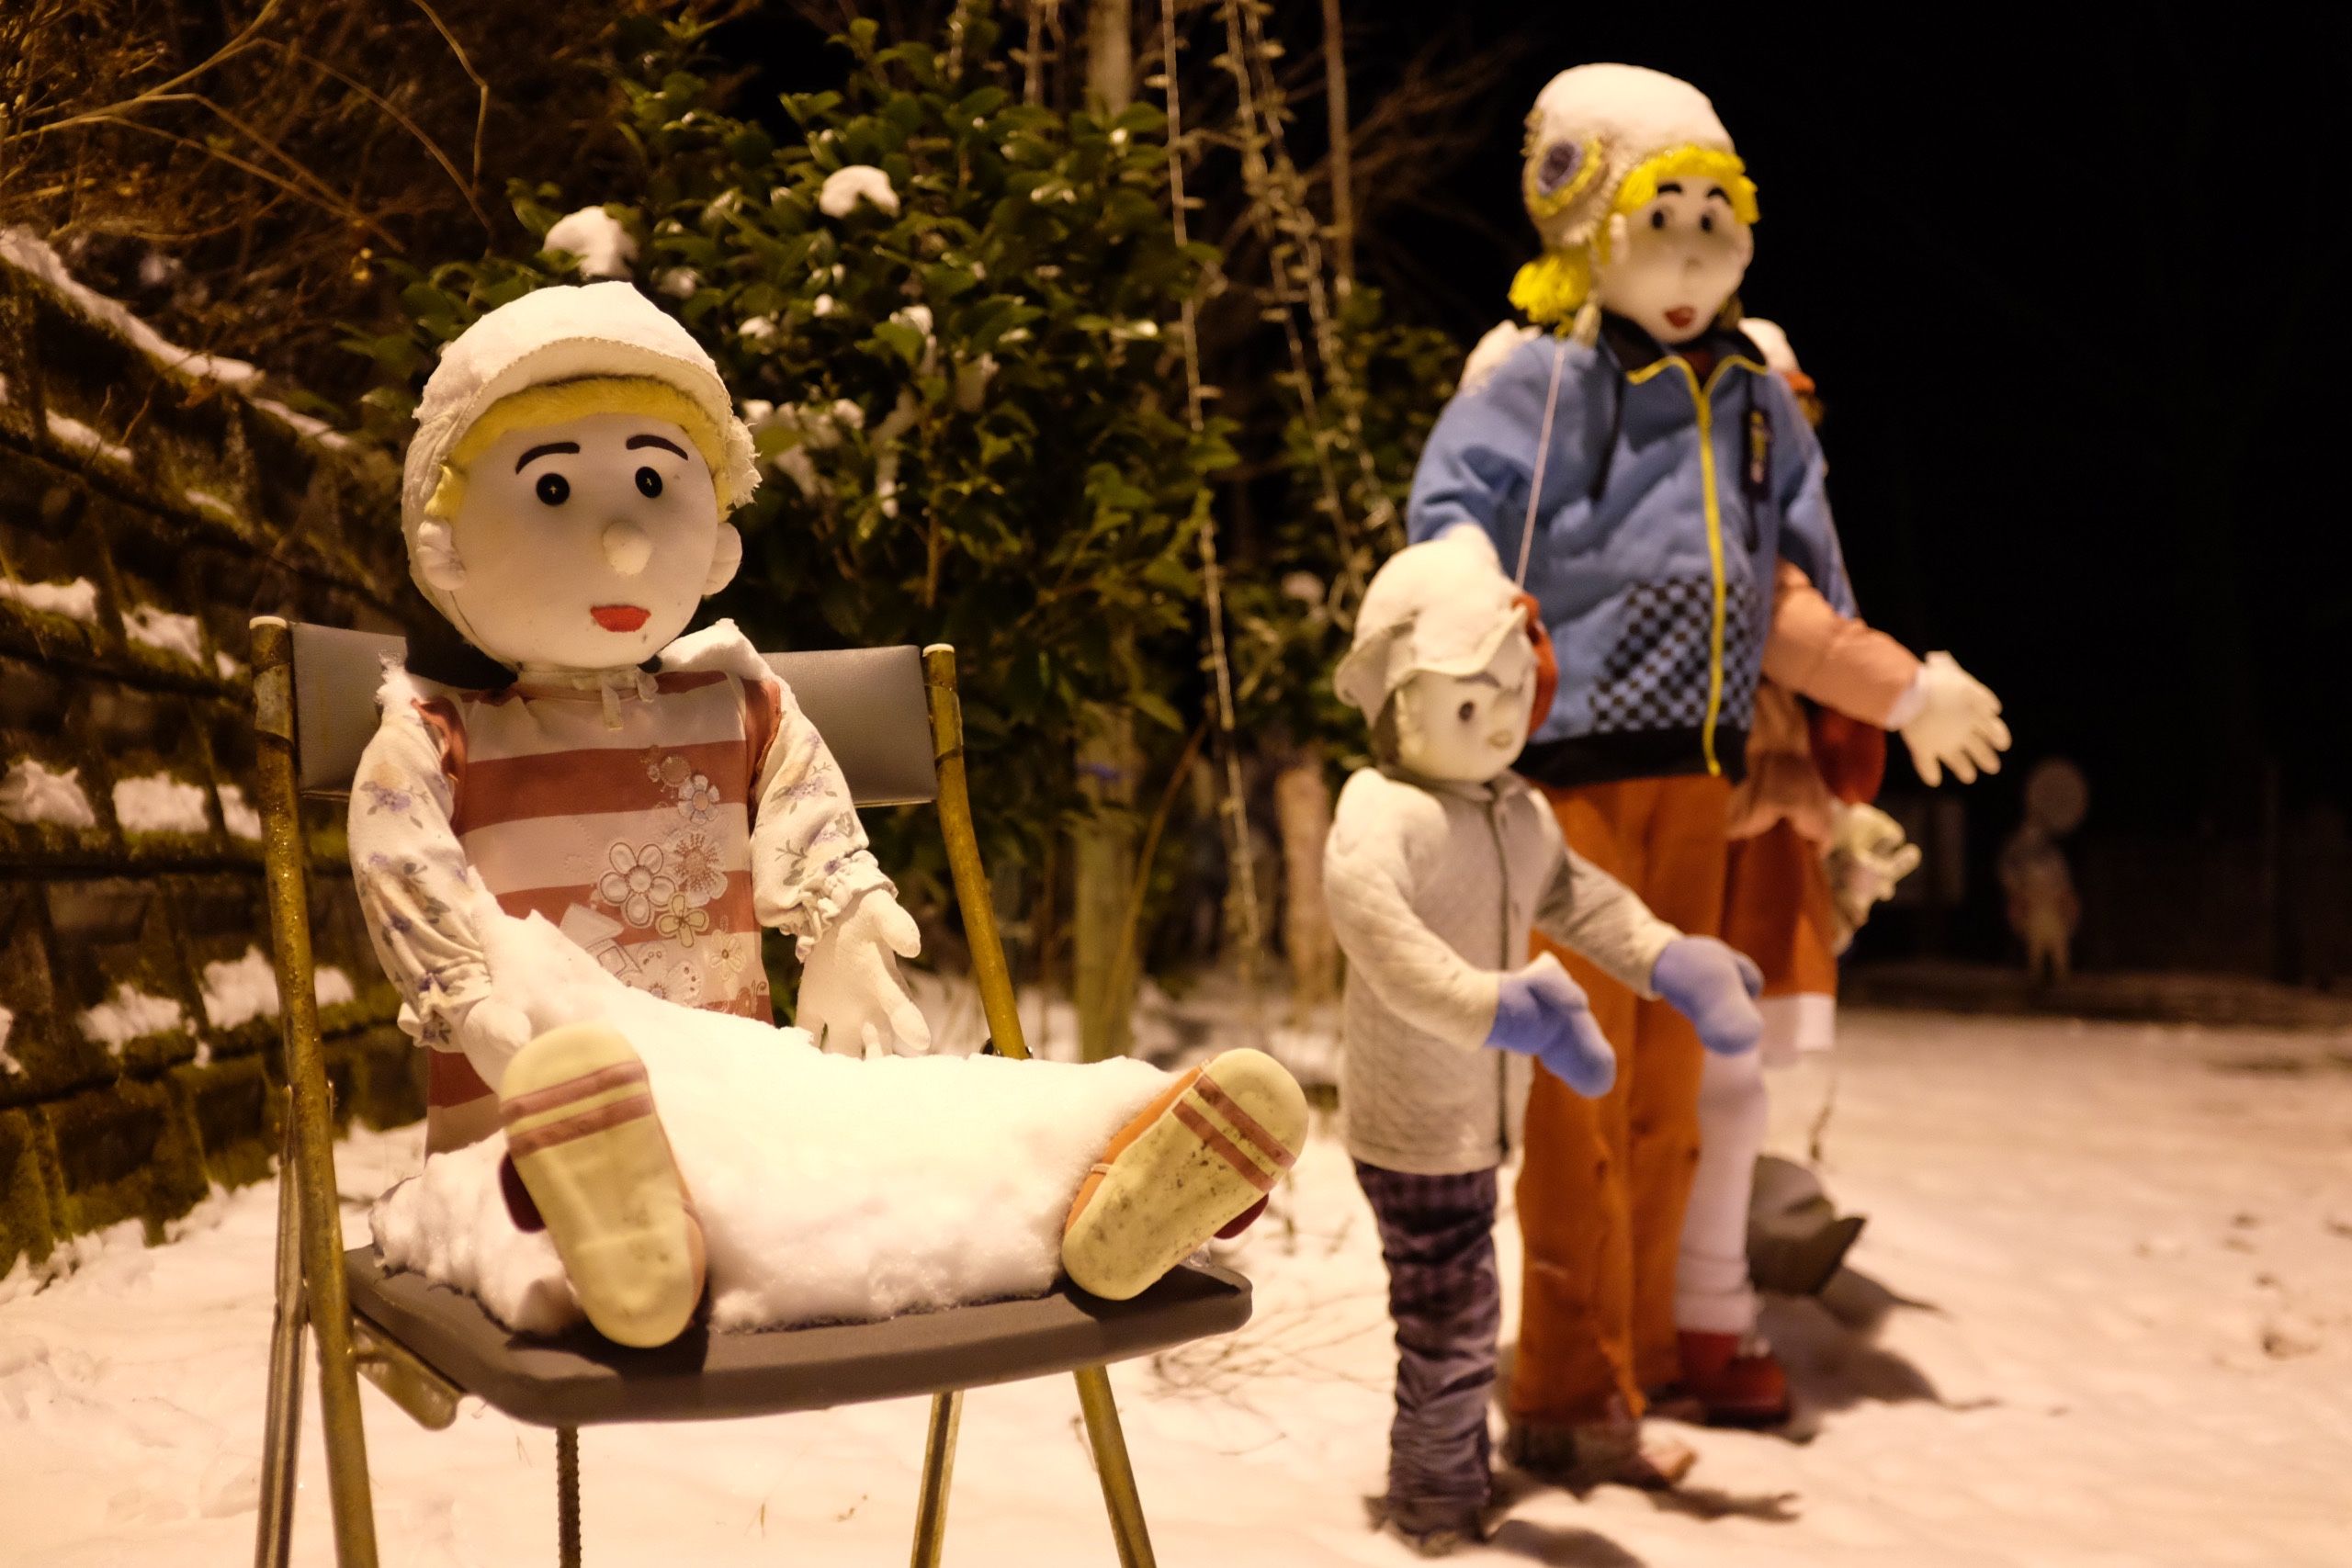 Closeup of some of the dolls, looking cheerful but covered in snow.